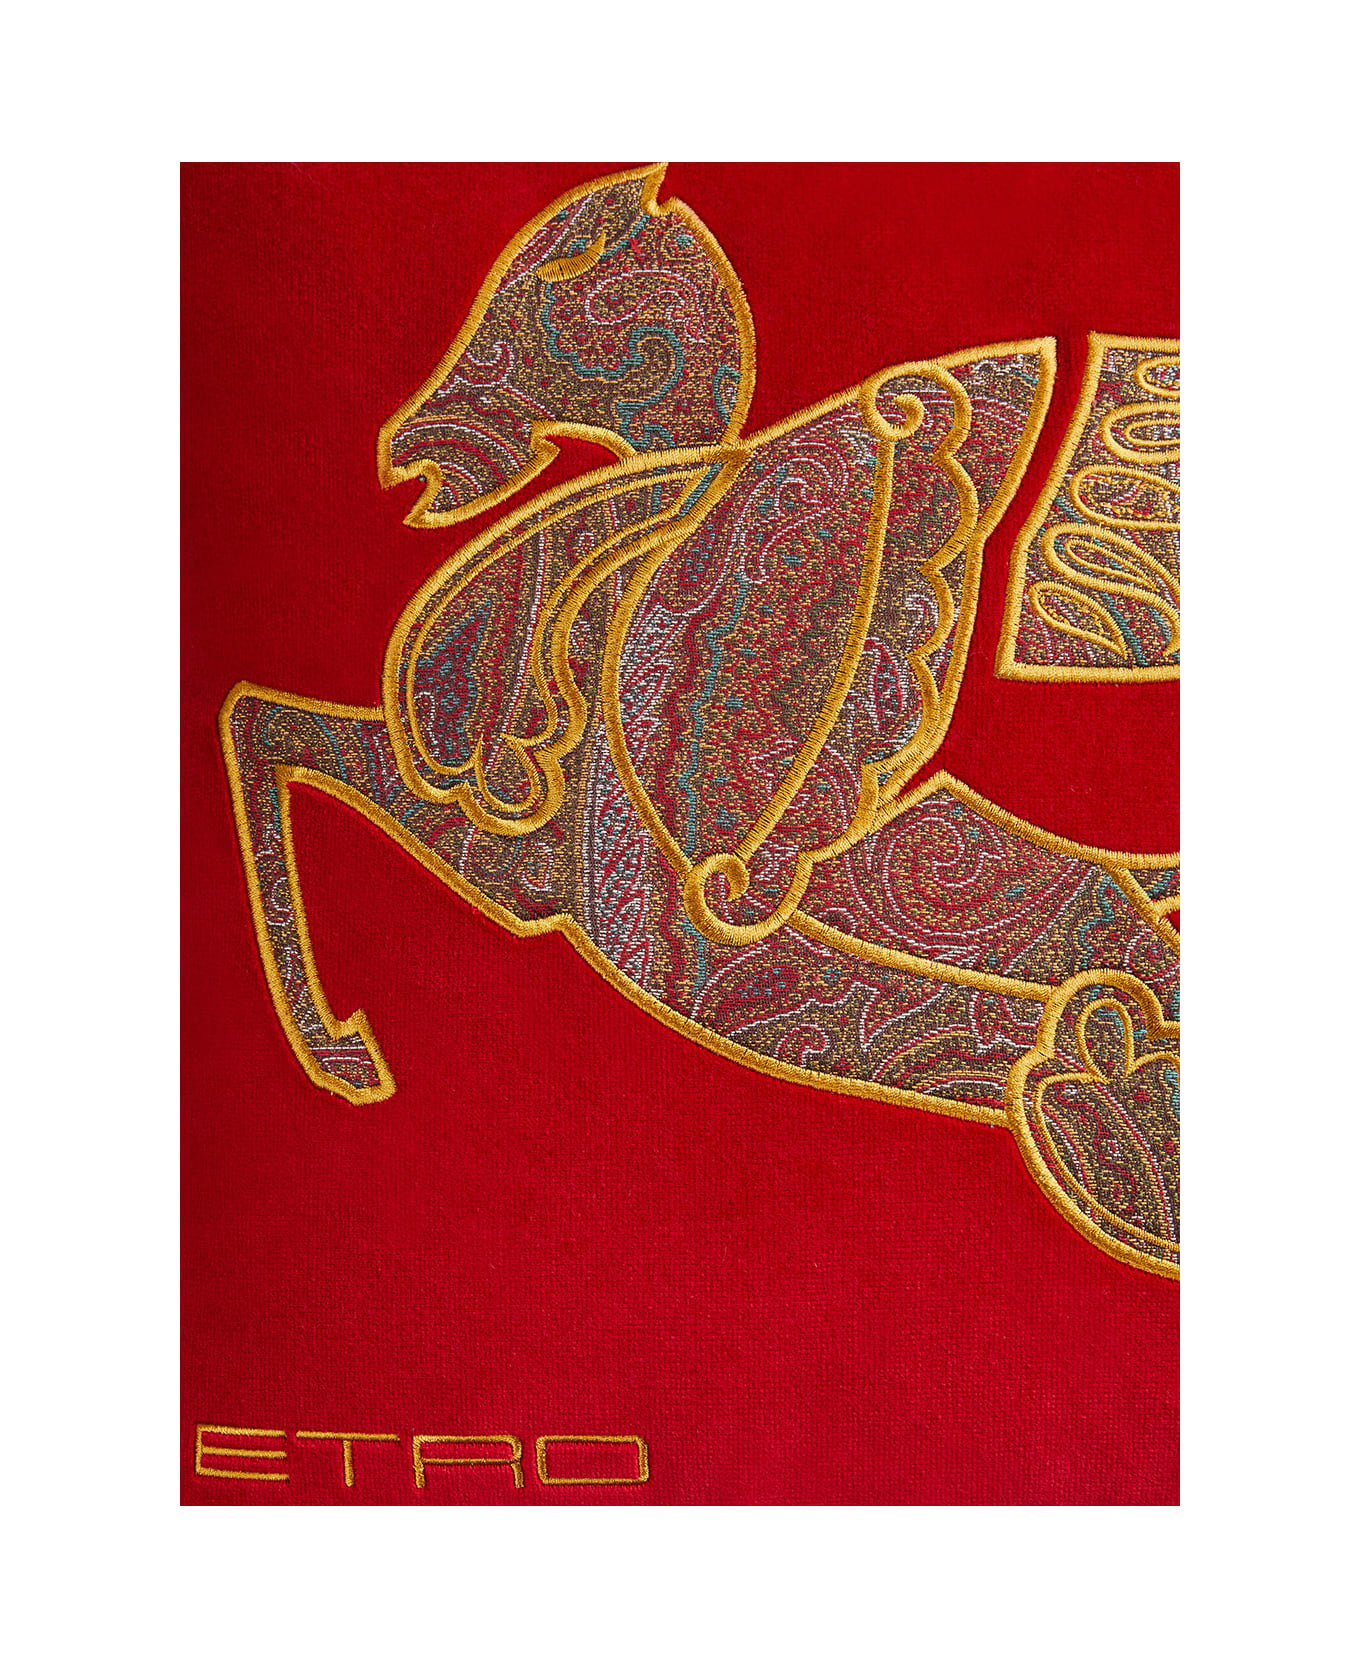 Etro Red Cushion With Winged Horse In Paisley Jacquard Fabric Home - Red